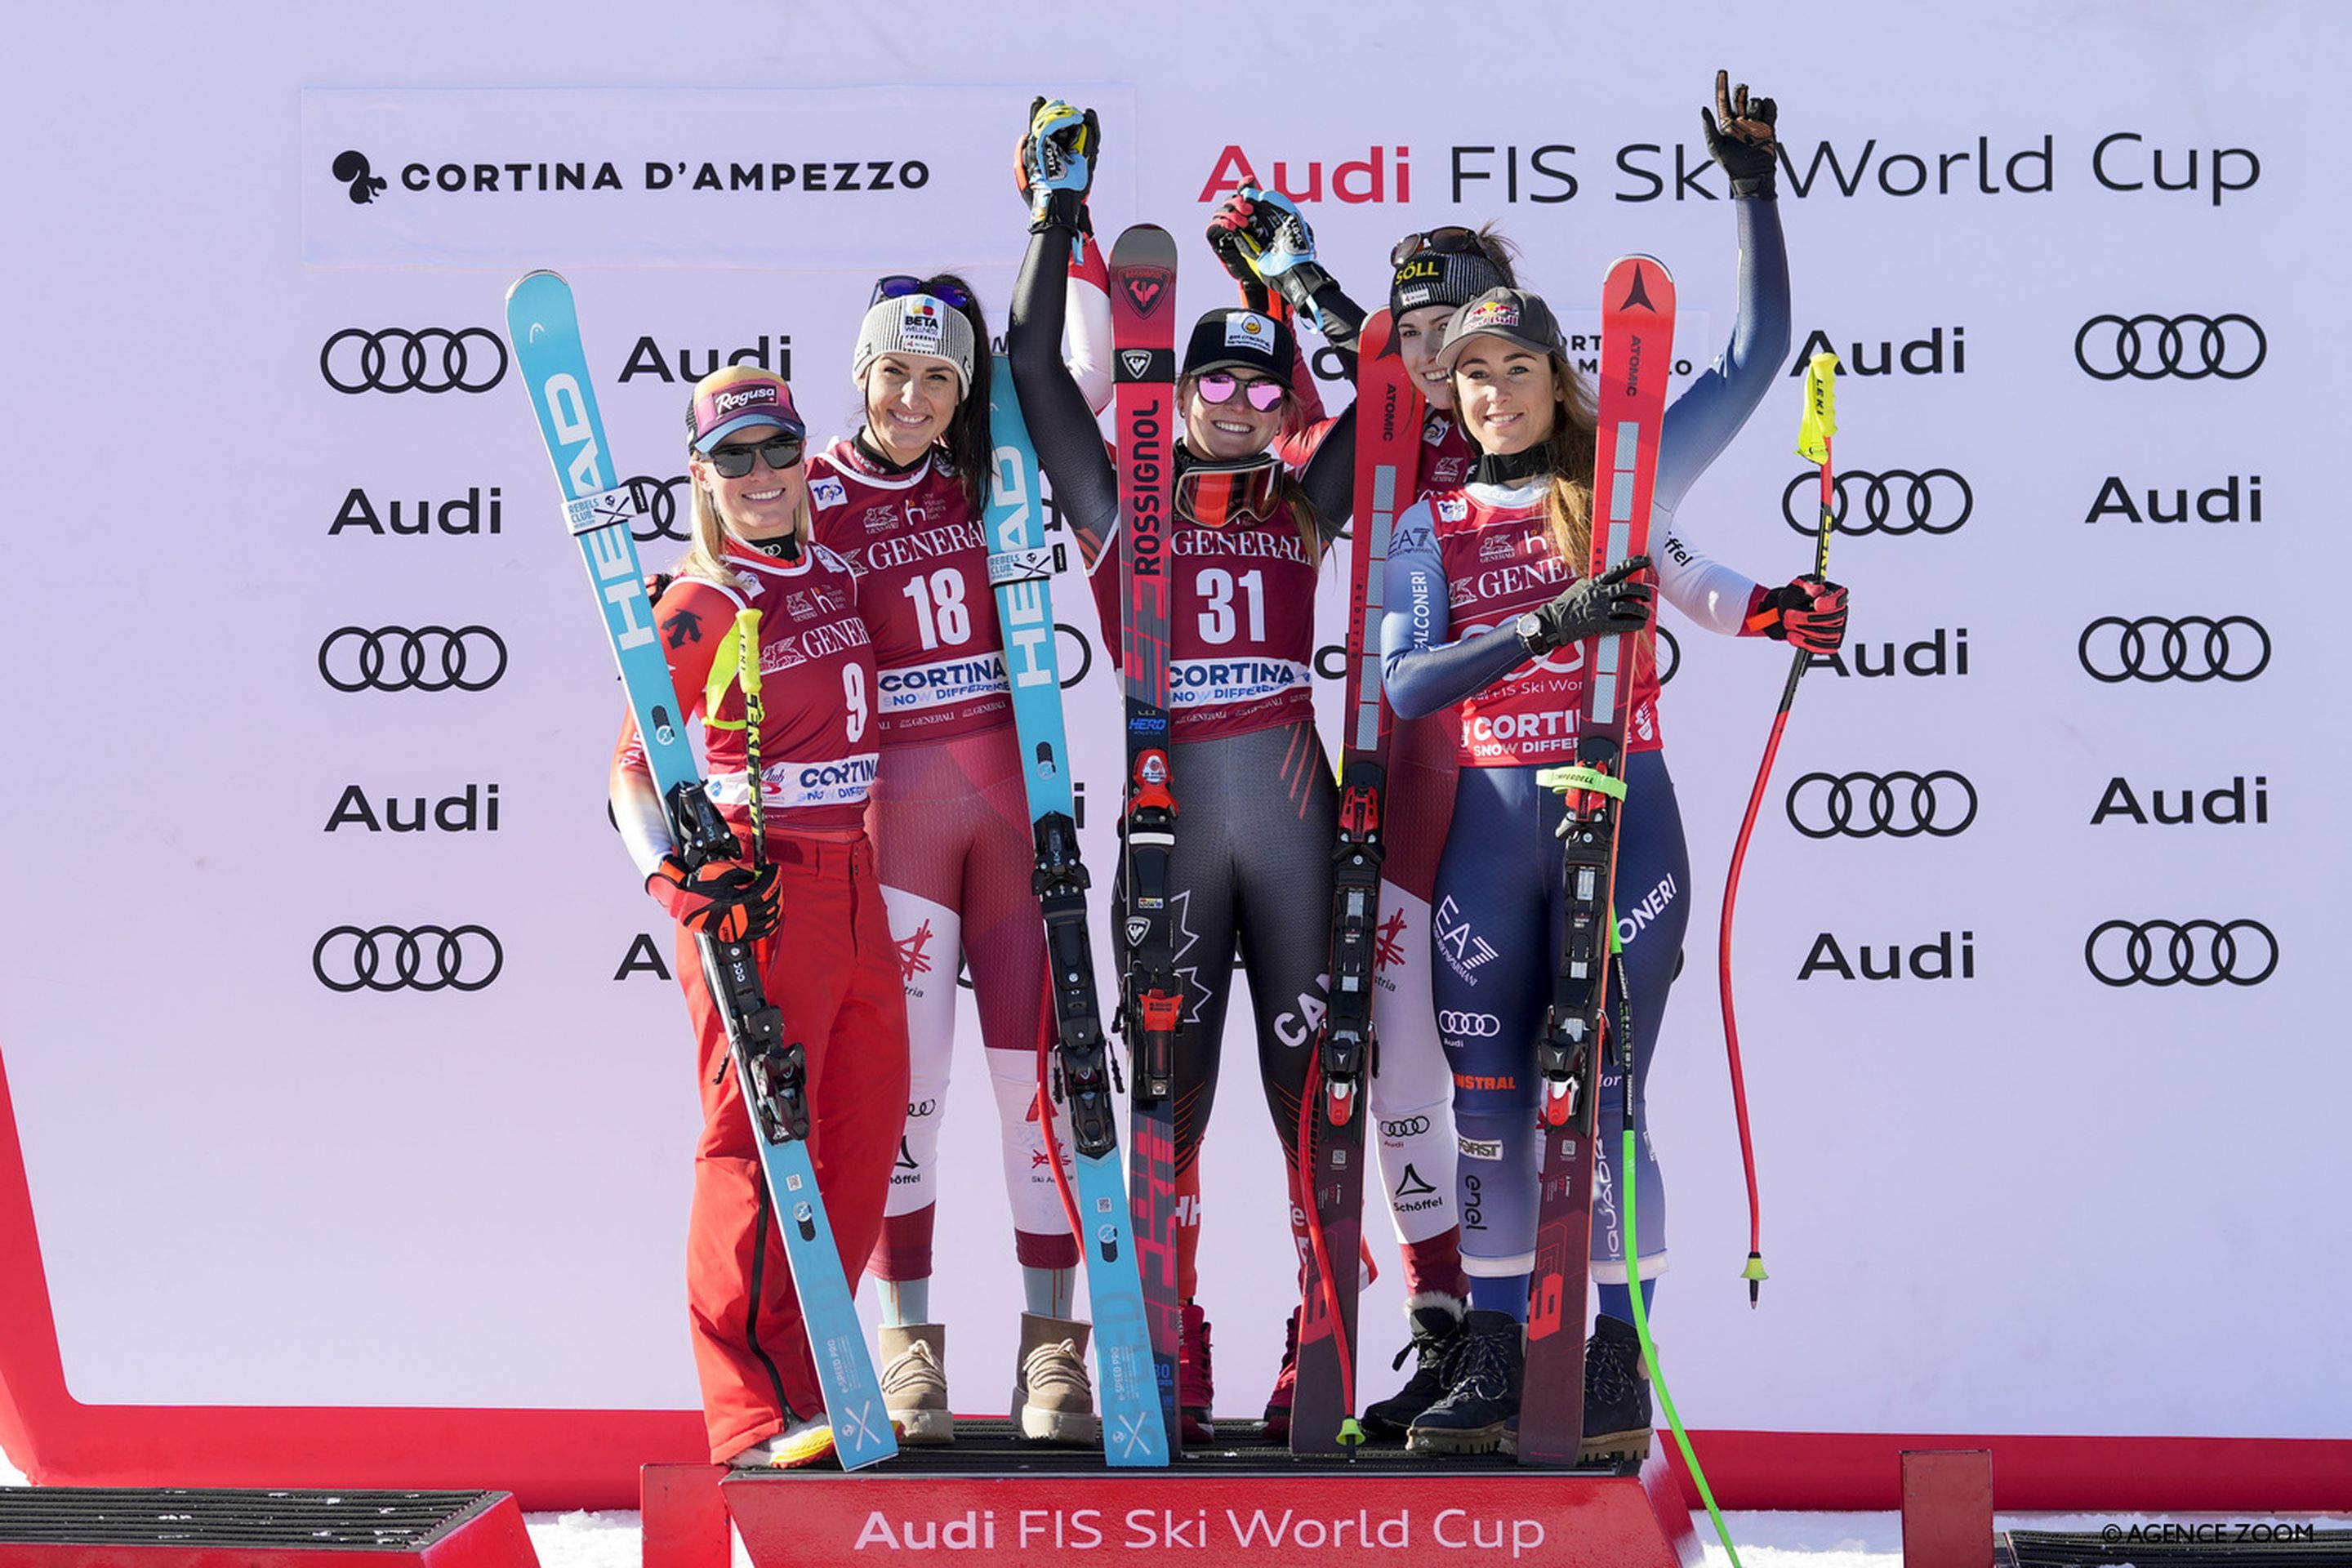 Five racers celebrate on a crowded Cortina d'Ampezzo downhill podium (Agence France)